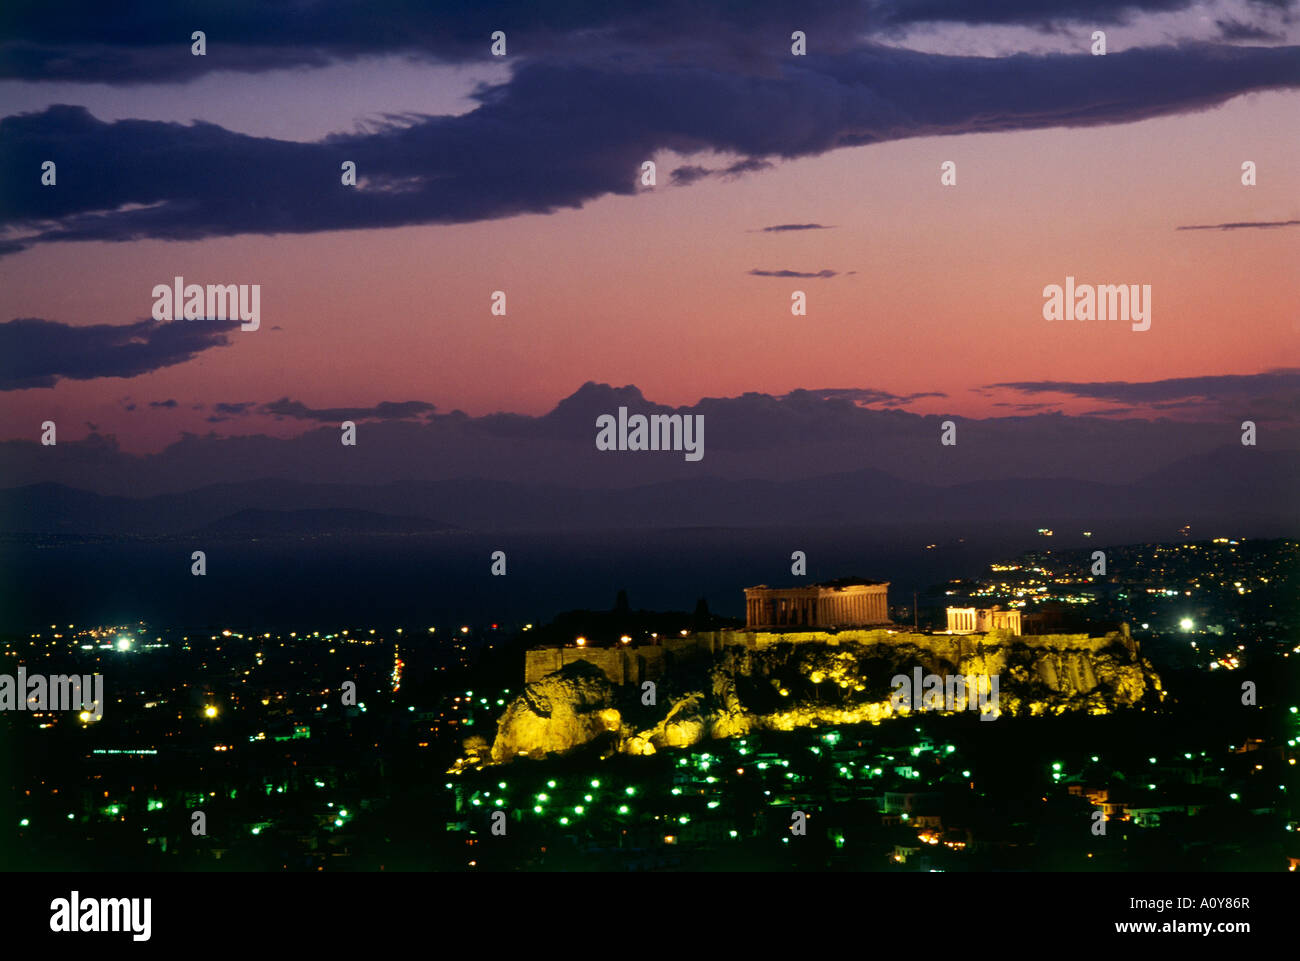 A darkening pink sky at dusk settles over the ruins of the Acropolis dating back to the 5th c BC and overlooking the twinkling lights of Athens from a 300 feet high rock Stock Photo